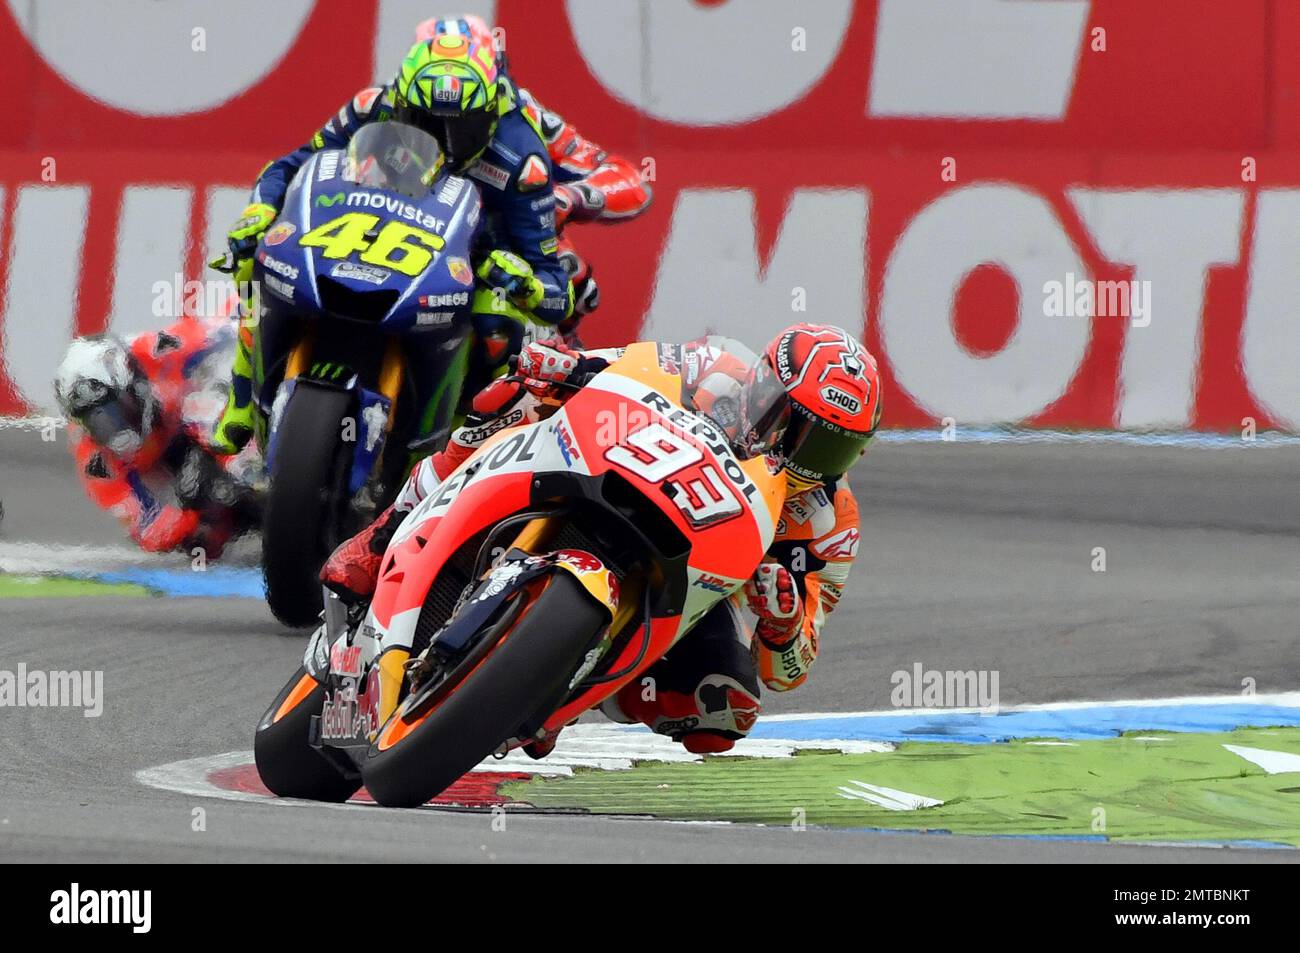 Moto GP rider Marc Marquez of Spain, right, takes a curve followed by Moto GP rider Valentino Rossi of Italy during the Dutch Motorcycle Grand Prix, in Assen, Northern Netherlands, Sunday, June